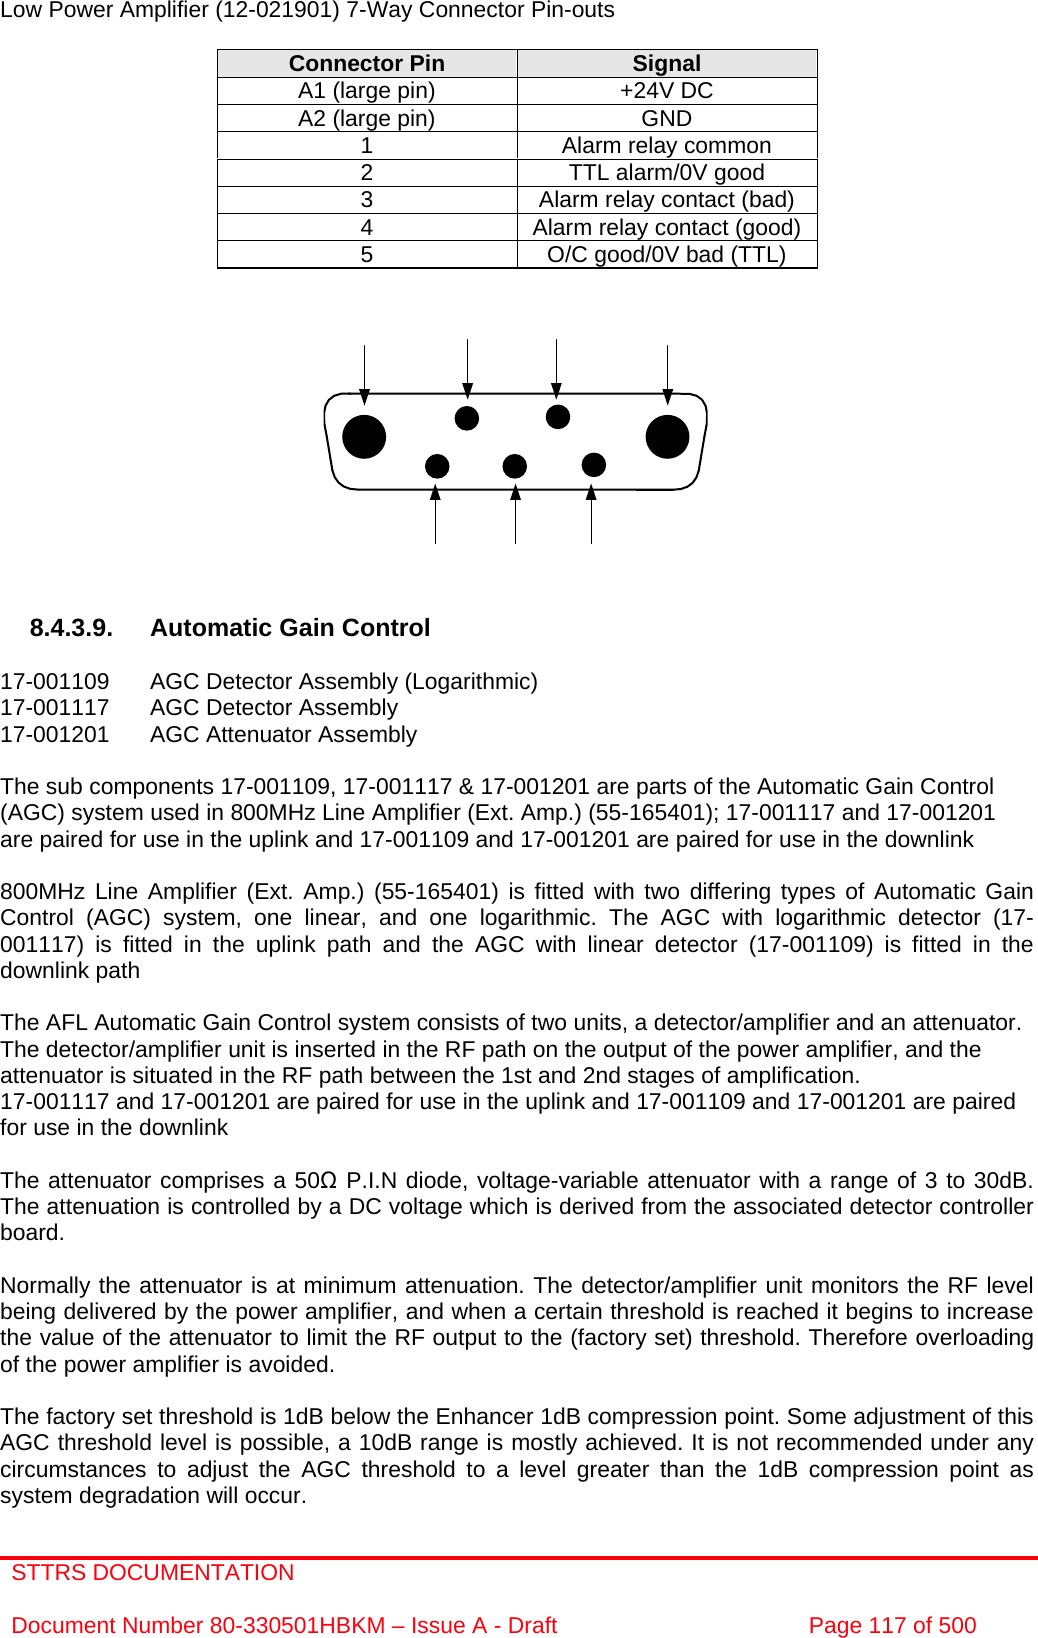 STTRS DOCUMENTATION  Document Number 80-330501HBKM – Issue A - Draft  Page 117 of 500   Low Power Amplifier (12-021901) 7-Way Connector Pin-outs  Connector Pin  Signal A1 (large pin)  +24V DC A2 (large pin)  GND 1  Alarm relay common 2  TTL alarm/0V good 3  Alarm relay contact (bad) 4  Alarm relay contact (good) 5  O/C good/0V bad (TTL)              8.4.3.9.  Automatic Gain Control  17-001109  AGC Detector Assembly (Logarithmic) 17-001117  AGC Detector Assembly  17-001201  AGC Attenuator Assembly   The sub components 17-001109, 17-001117 &amp; 17-001201 are parts of the Automatic Gain Control (AGC) system used in 800MHz Line Amplifier (Ext. Amp.) (55-165401); 17-001117 and 17-001201 are paired for use in the uplink and 17-001109 and 17-001201 are paired for use in the downlink  800MHz Line Amplifier (Ext. Amp.) (55-165401) is fitted with two differing types of Automatic Gain Control (AGC) system, one linear, and one logarithmic. The AGC with logarithmic detector (17-001117) is fitted in the uplink path and the AGC with linear detector (17-001109) is fitted in the downlink path   The AFL Automatic Gain Control system consists of two units, a detector/amplifier and an attenuator. The detector/amplifier unit is inserted in the RF path on the output of the power amplifier, and the attenuator is situated in the RF path between the 1st and 2nd stages of amplification.  17-001117 and 17-001201 are paired for use in the uplink and 17-001109 and 17-001201 are paired for use in the downlink  The attenuator comprises a 50 P.I.N diode, voltage-variable attenuator with a range of 3 to 30dB. The attenuation is controlled by a DC voltage which is derived from the associated detector controller board.  Normally the attenuator is at minimum attenuation. The detector/amplifier unit monitors the RF level being delivered by the power amplifier, and when a certain threshold is reached it begins to increase the value of the attenuator to limit the RF output to the (factory set) threshold. Therefore overloading of the power amplifier is avoided.  The factory set threshold is 1dB below the Enhancer 1dB compression point. Some adjustment of this AGC threshold level is possible, a 10dB range is mostly achieved. It is not recommended under any circumstances to adjust the AGC threshold to a level greater than the 1dB compression point as system degradation will occur. 